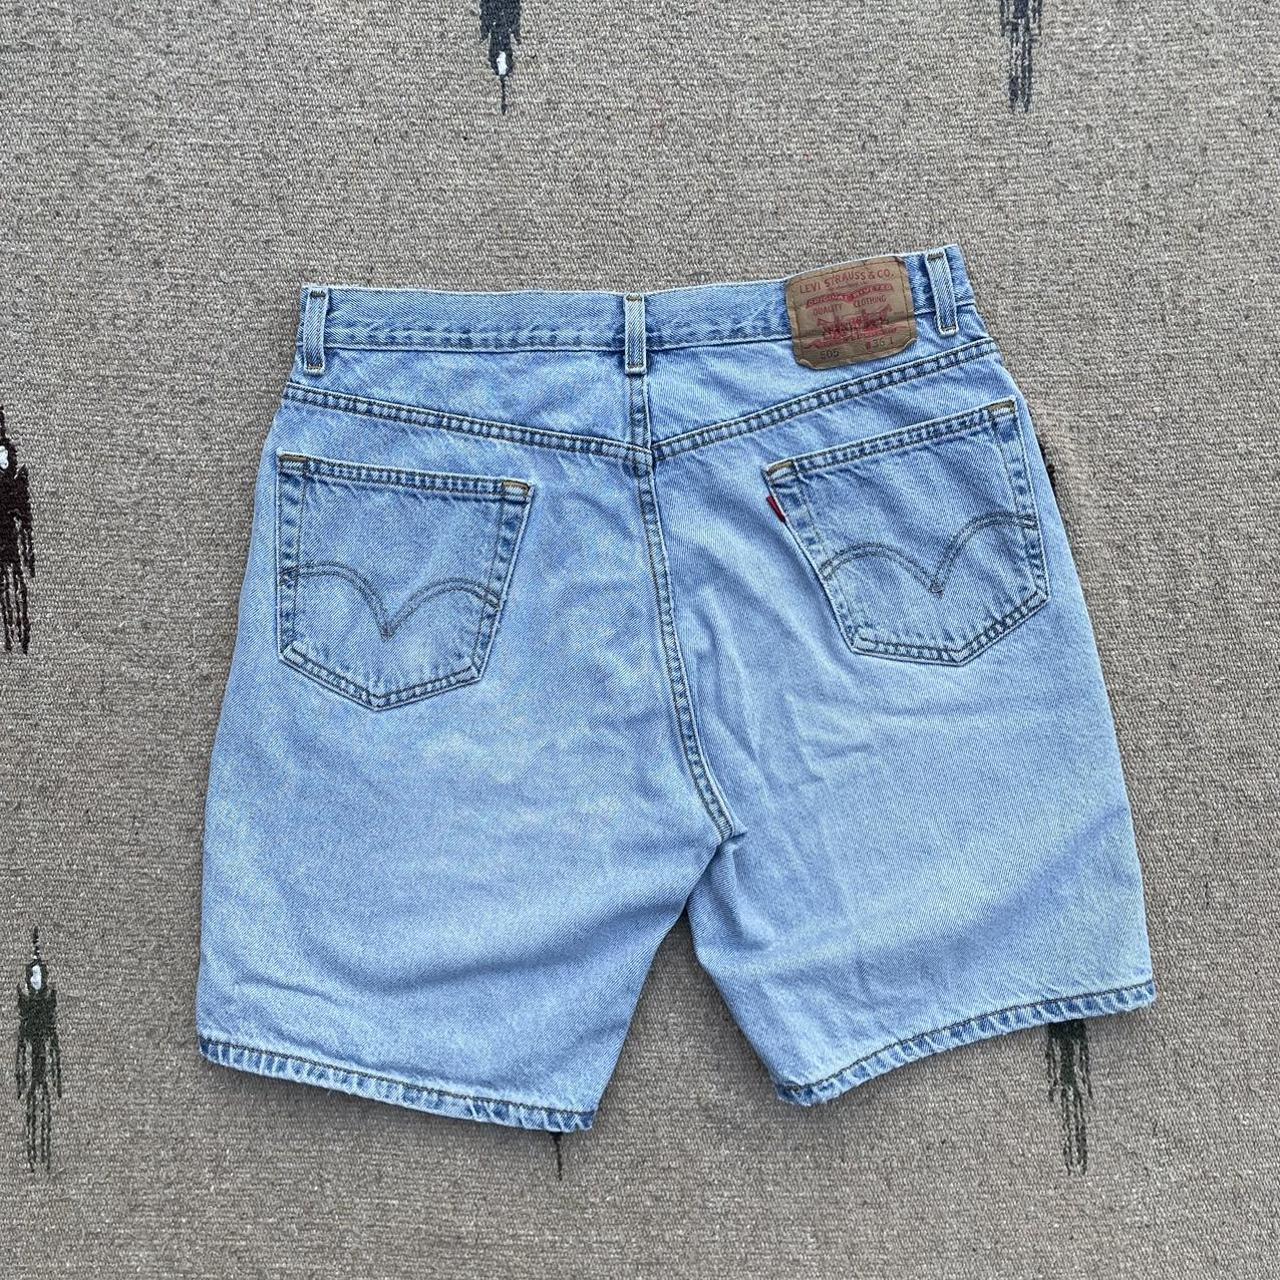 Levi's Men's Blue and Red Shorts (4)